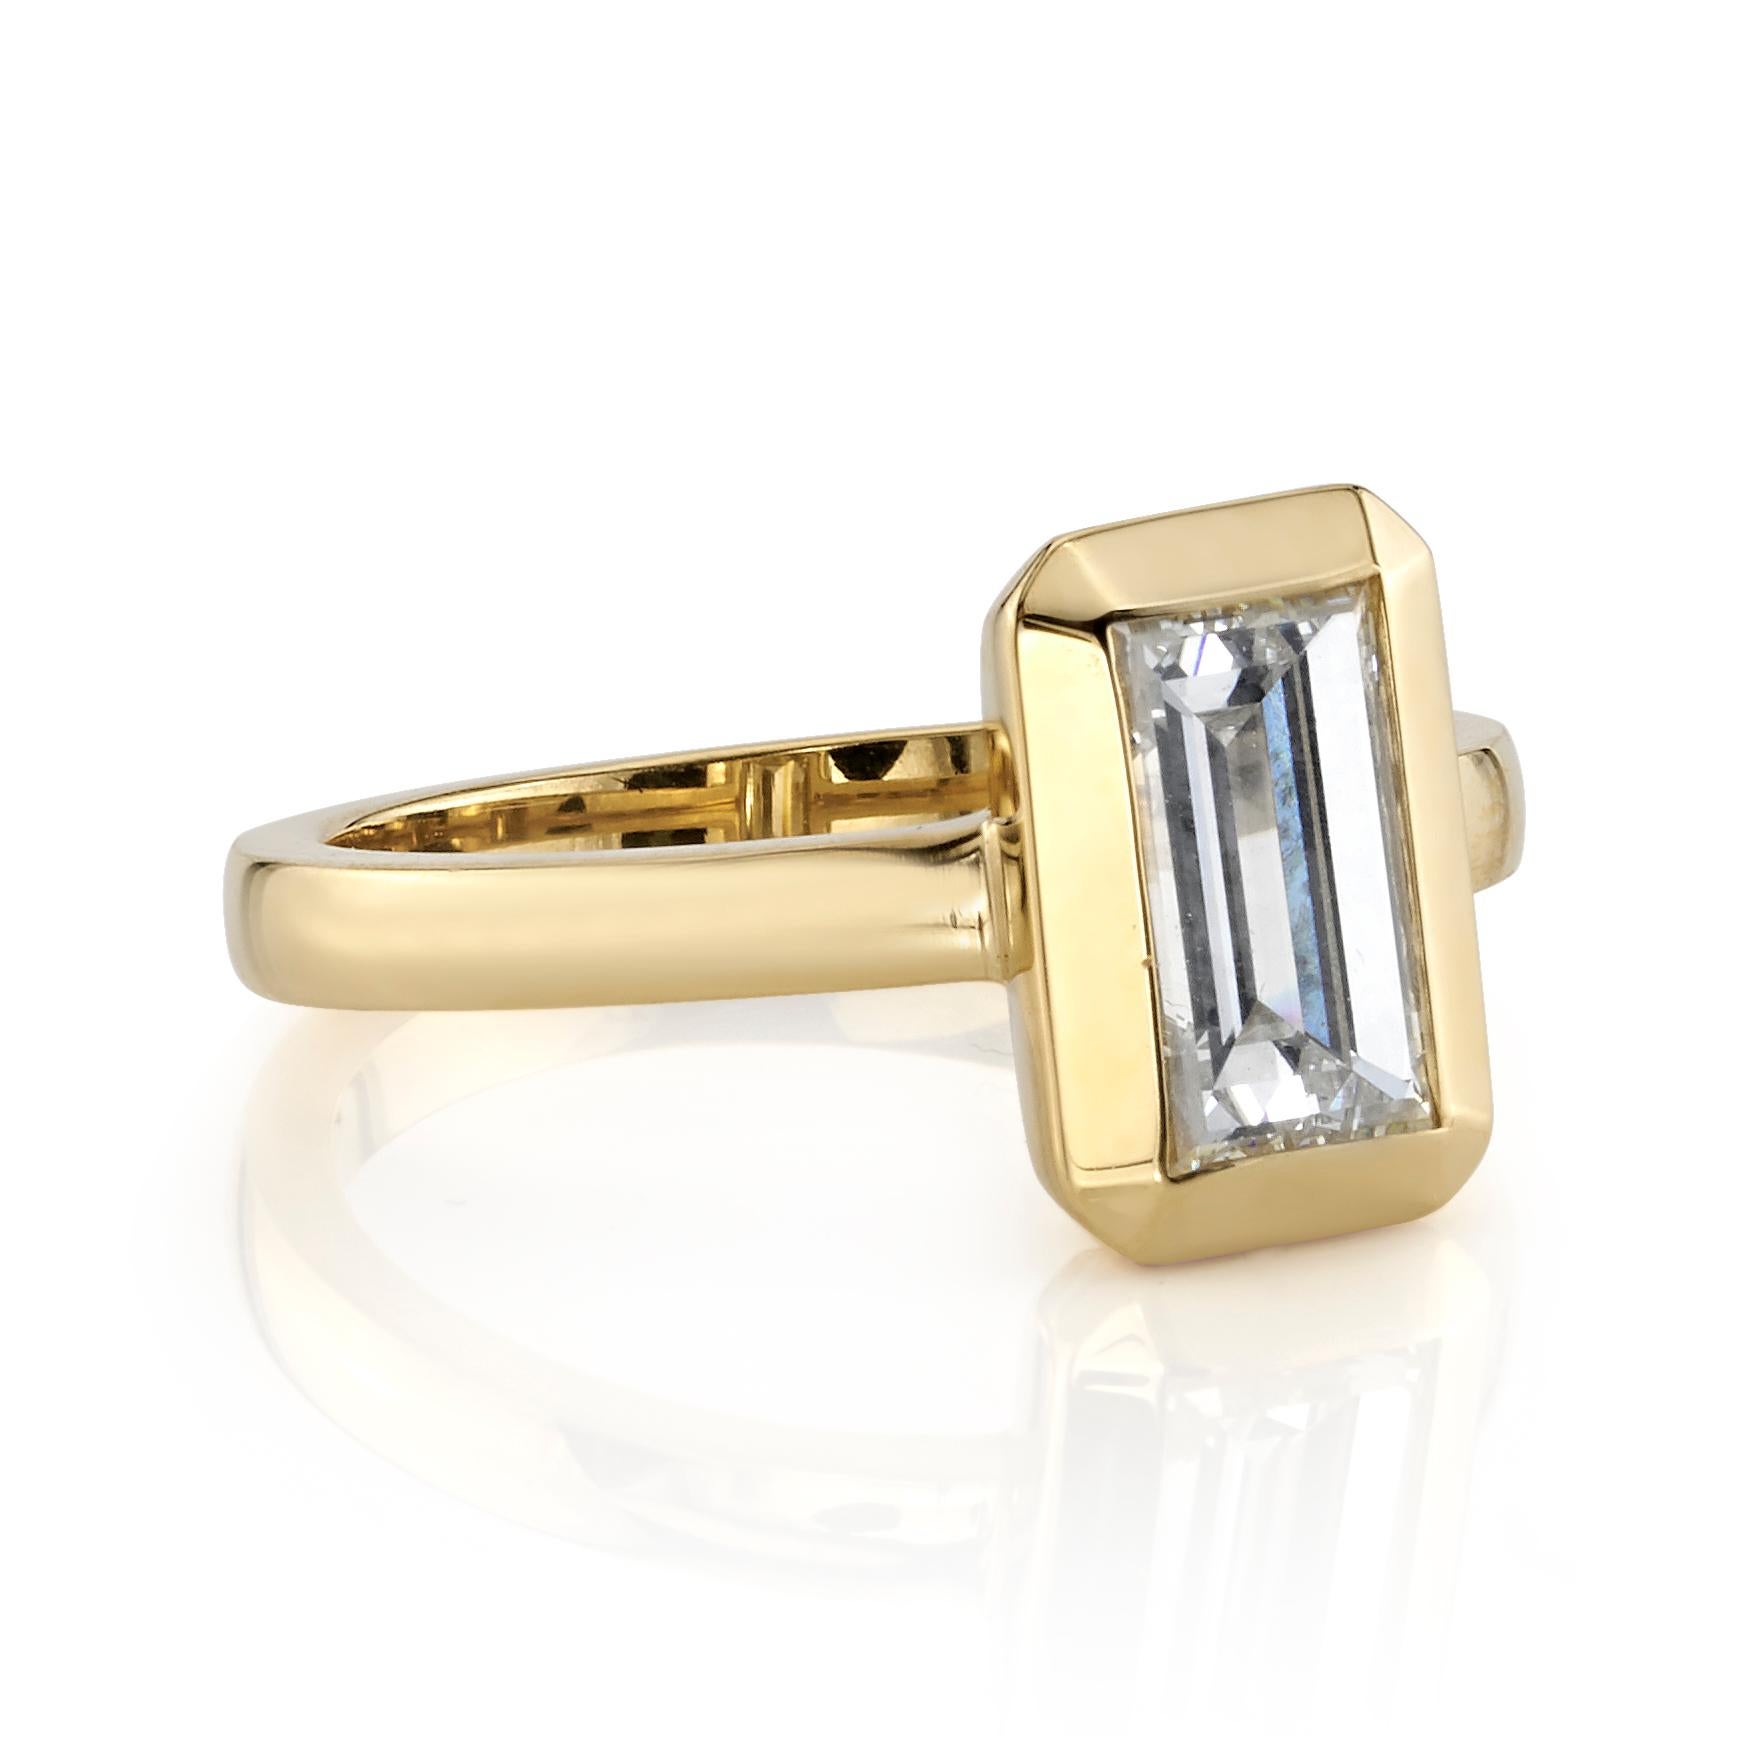 1.27ct I/VS2 GIA certified rectangular step cut diamond set in a handcrafted 18K yellow gold mounting. 

